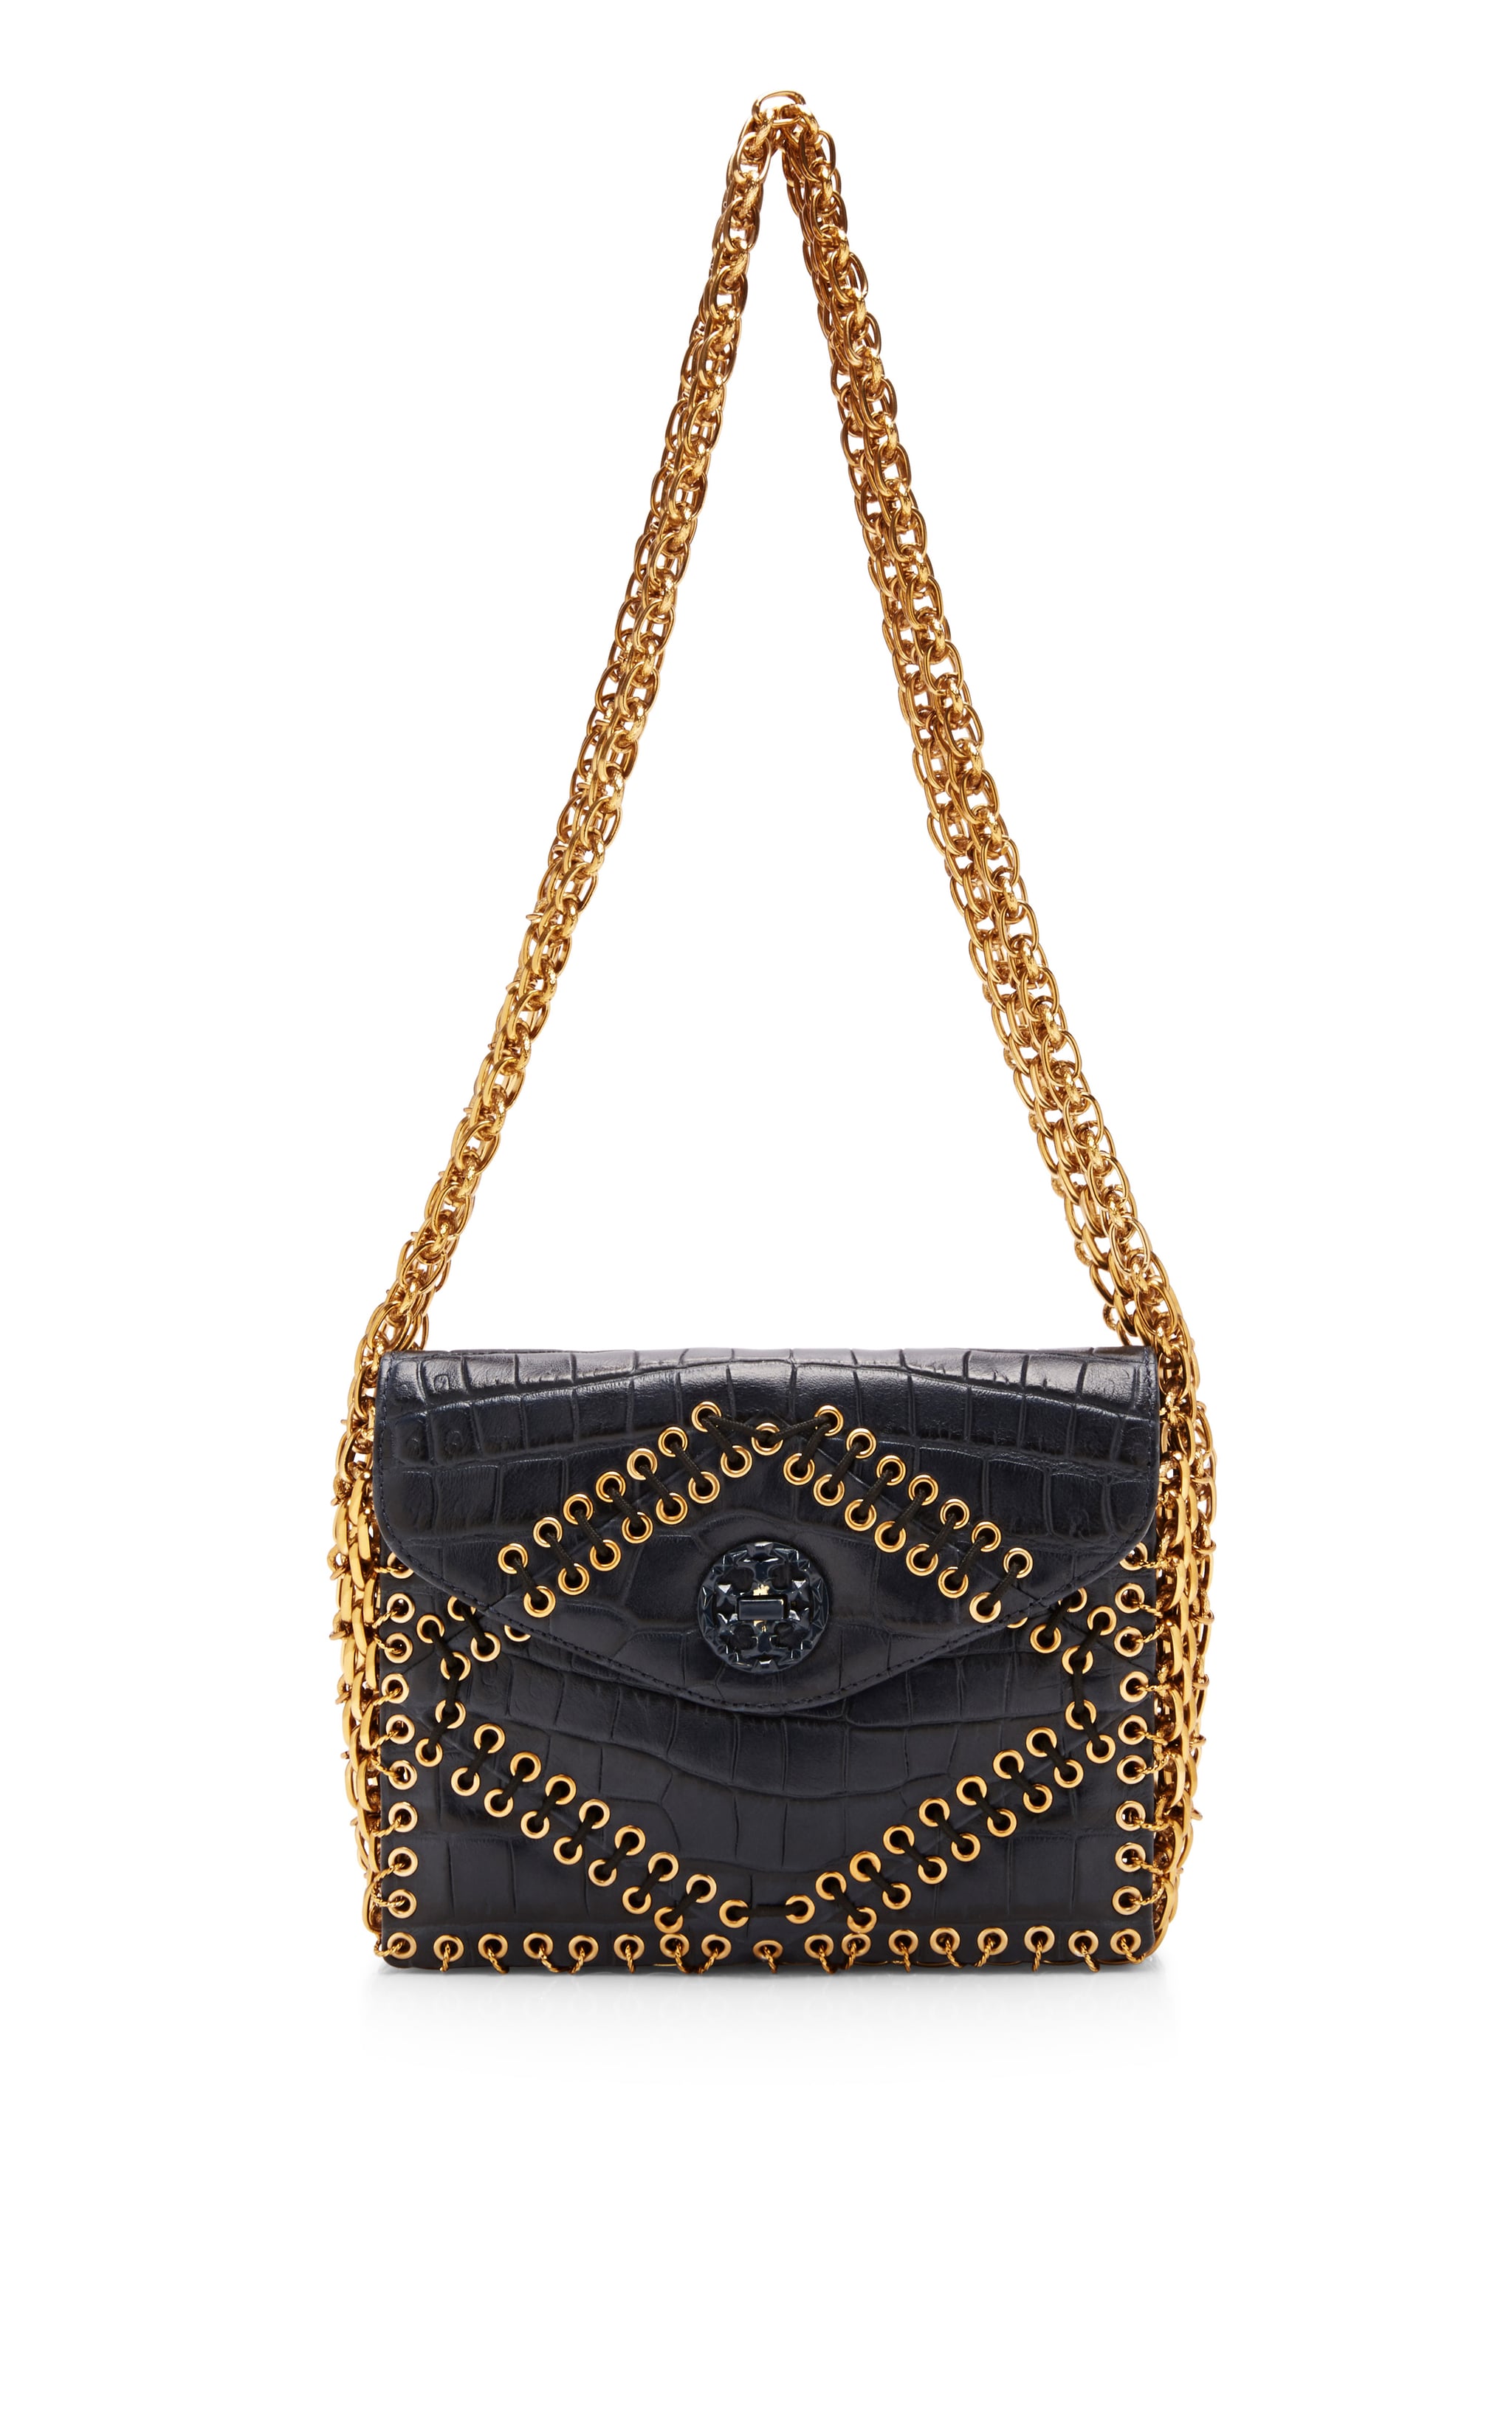 Tory Burch Fall 2014 Bags and Purses | Pictures | POPSUGAR Fashion